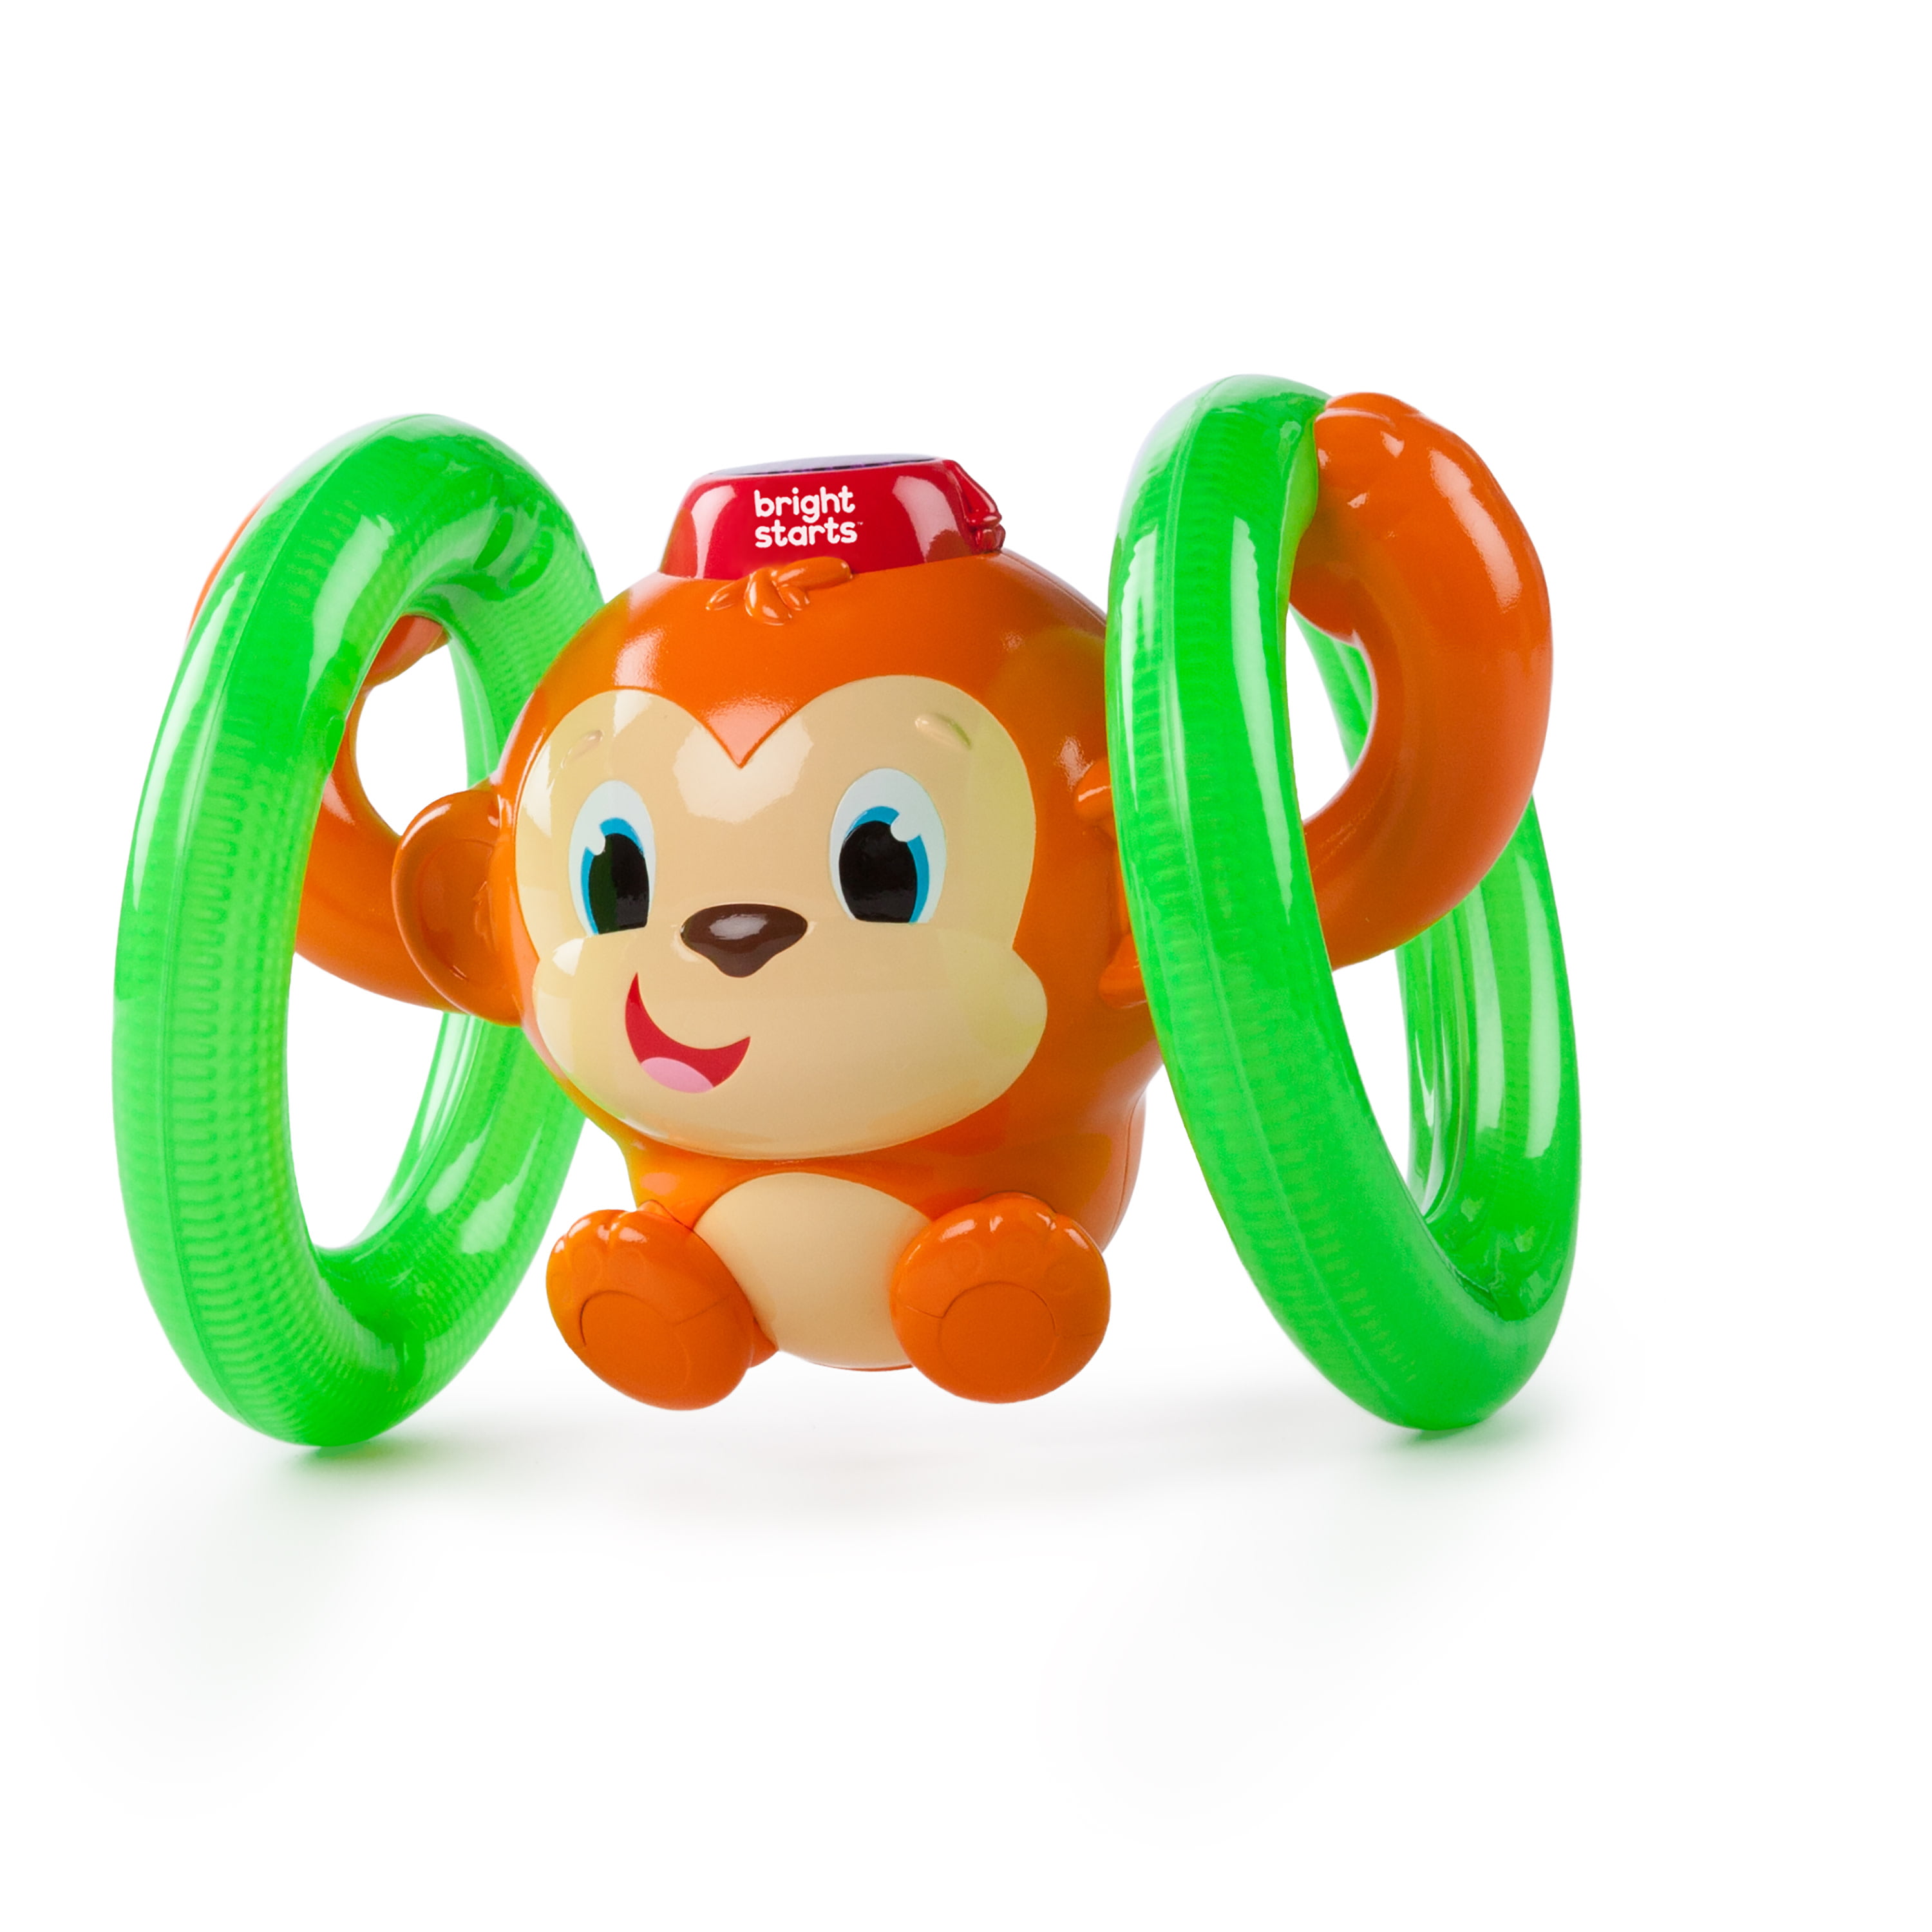 Light Up Bicycle Monkey Bear Kids LED Moving Toy Figure Sounds Real Movement 